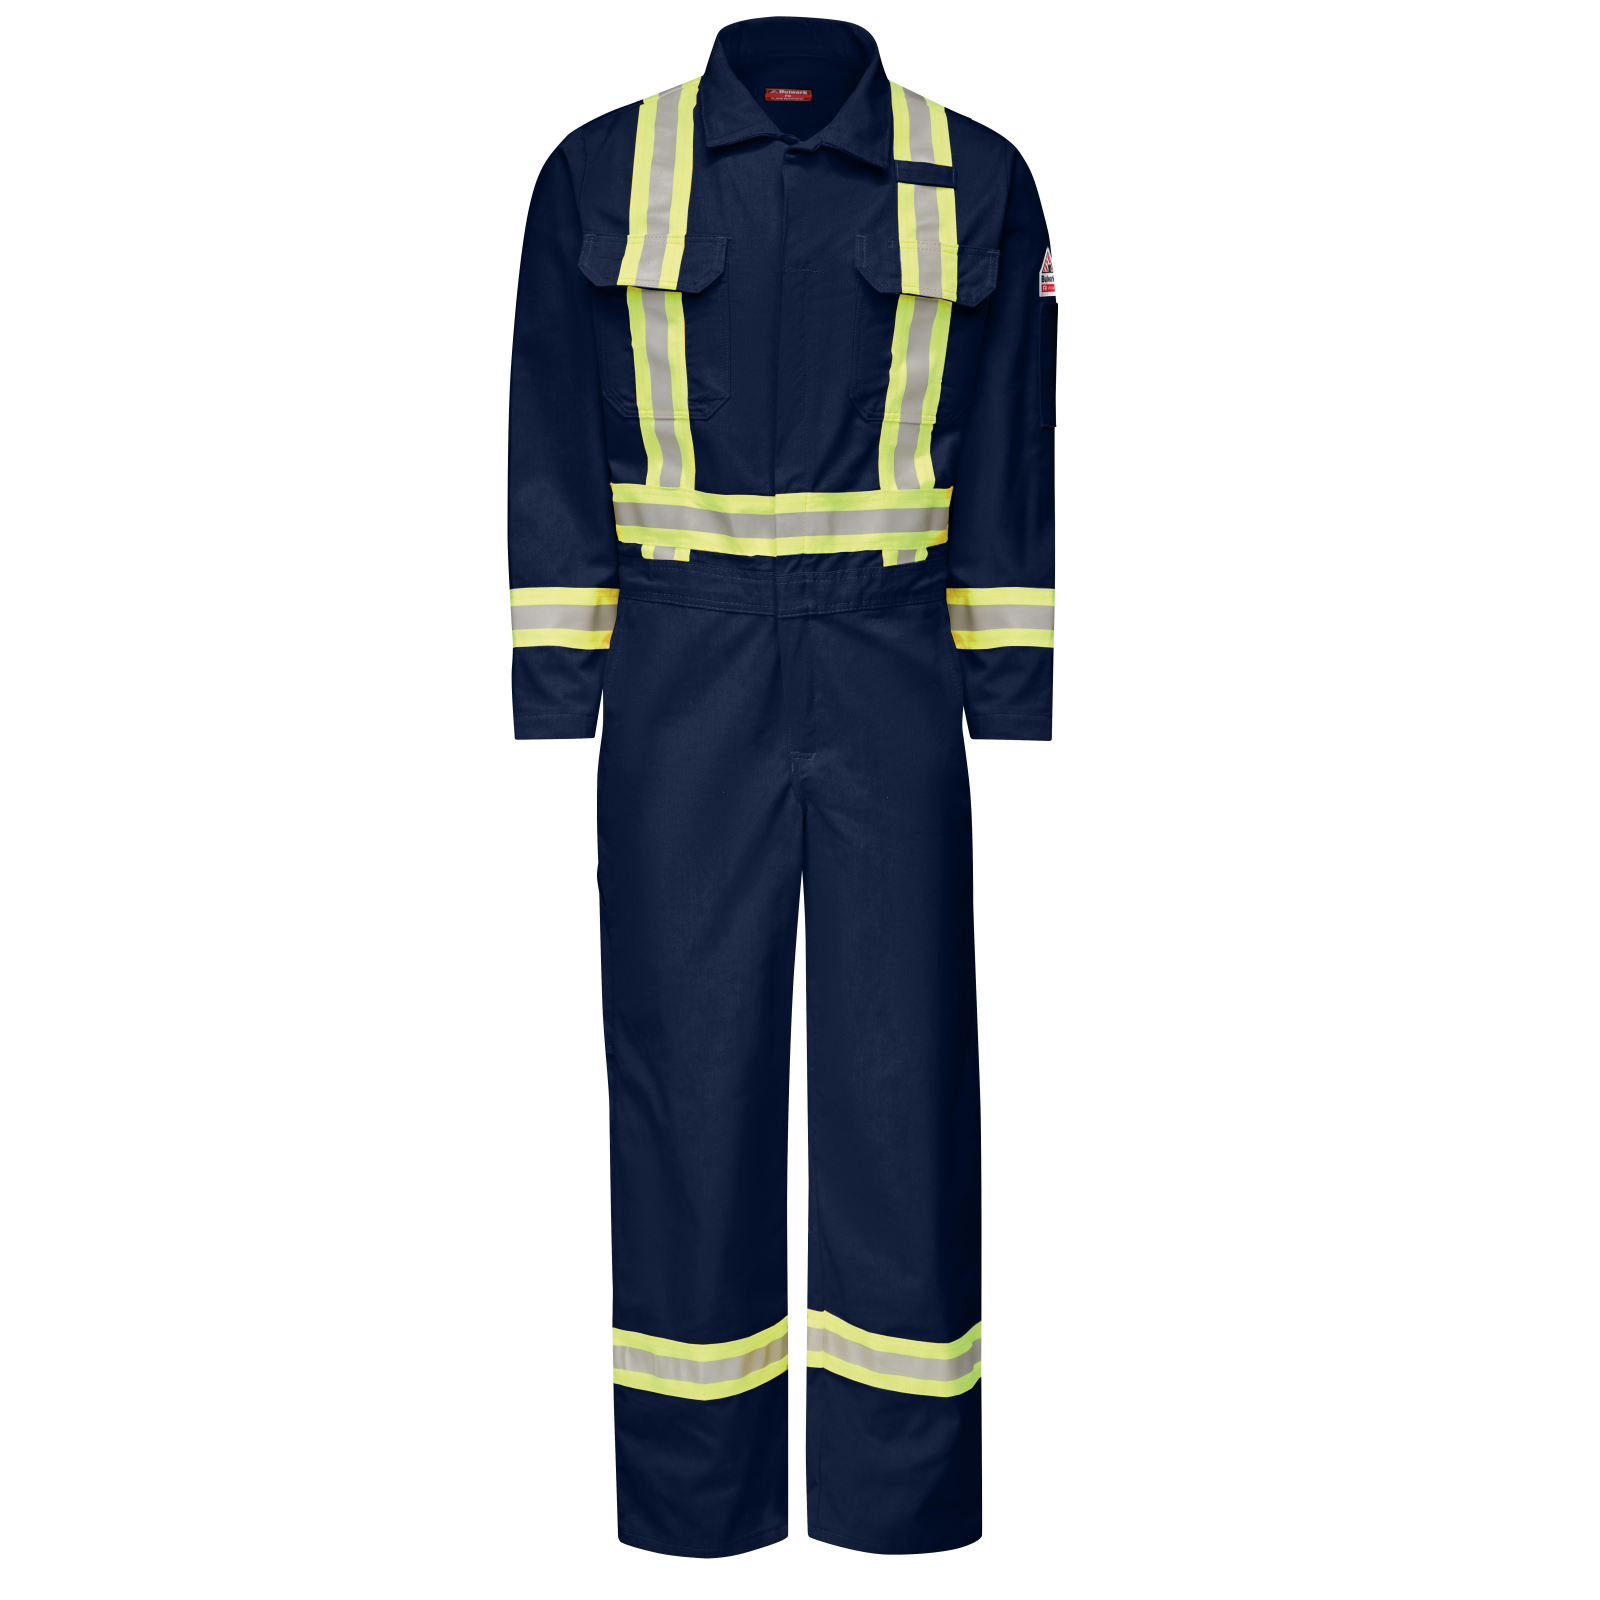 Men's Midweight FR Premium Coverall with Reflective Trim 